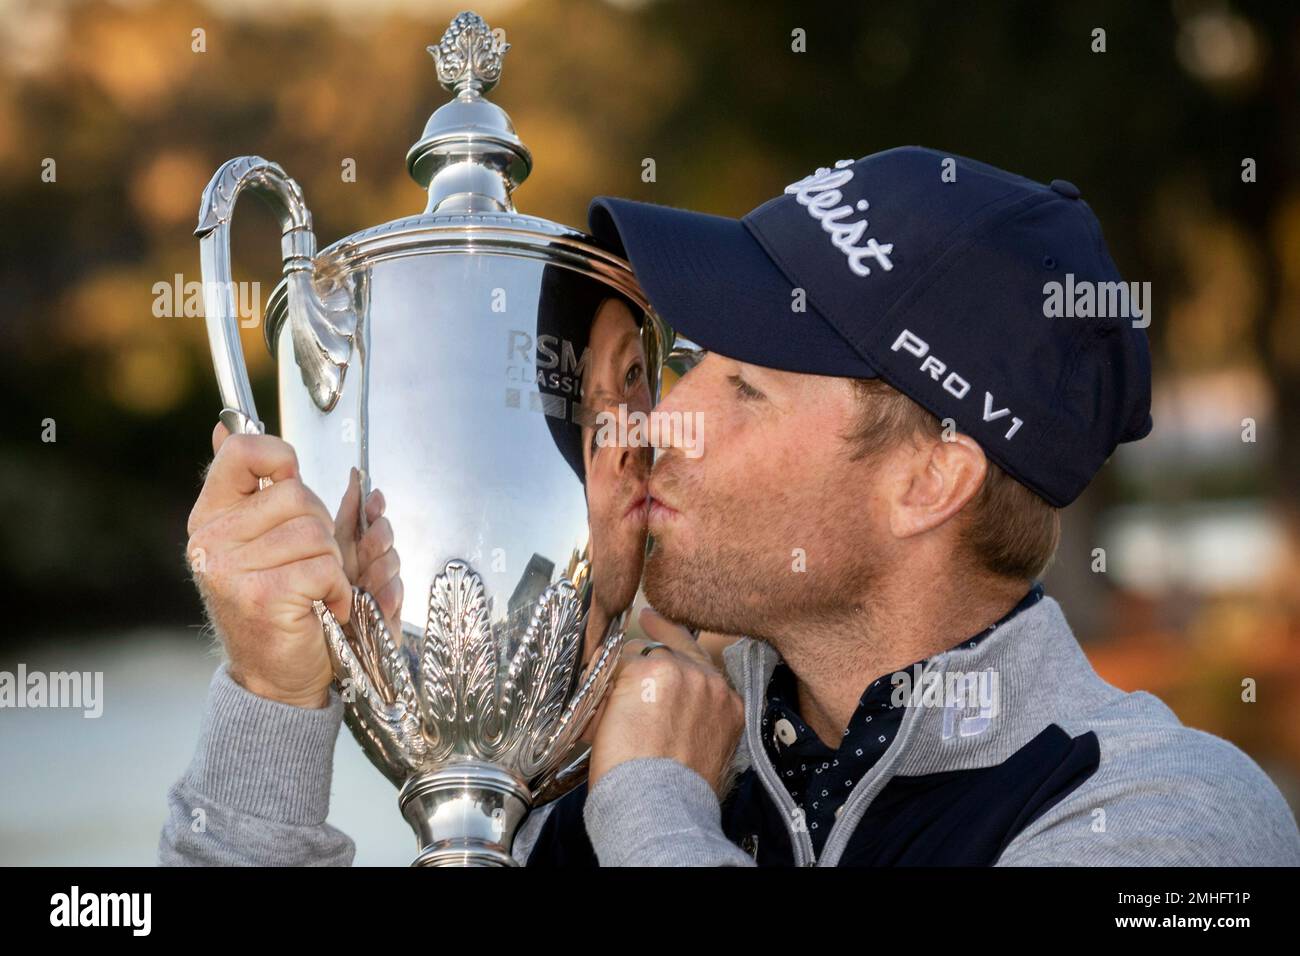 Tyler Duncan kisses the trophy after a winning a second hole playoff against Webb Simpson during the final round of the RSM Classic golf tournament in St